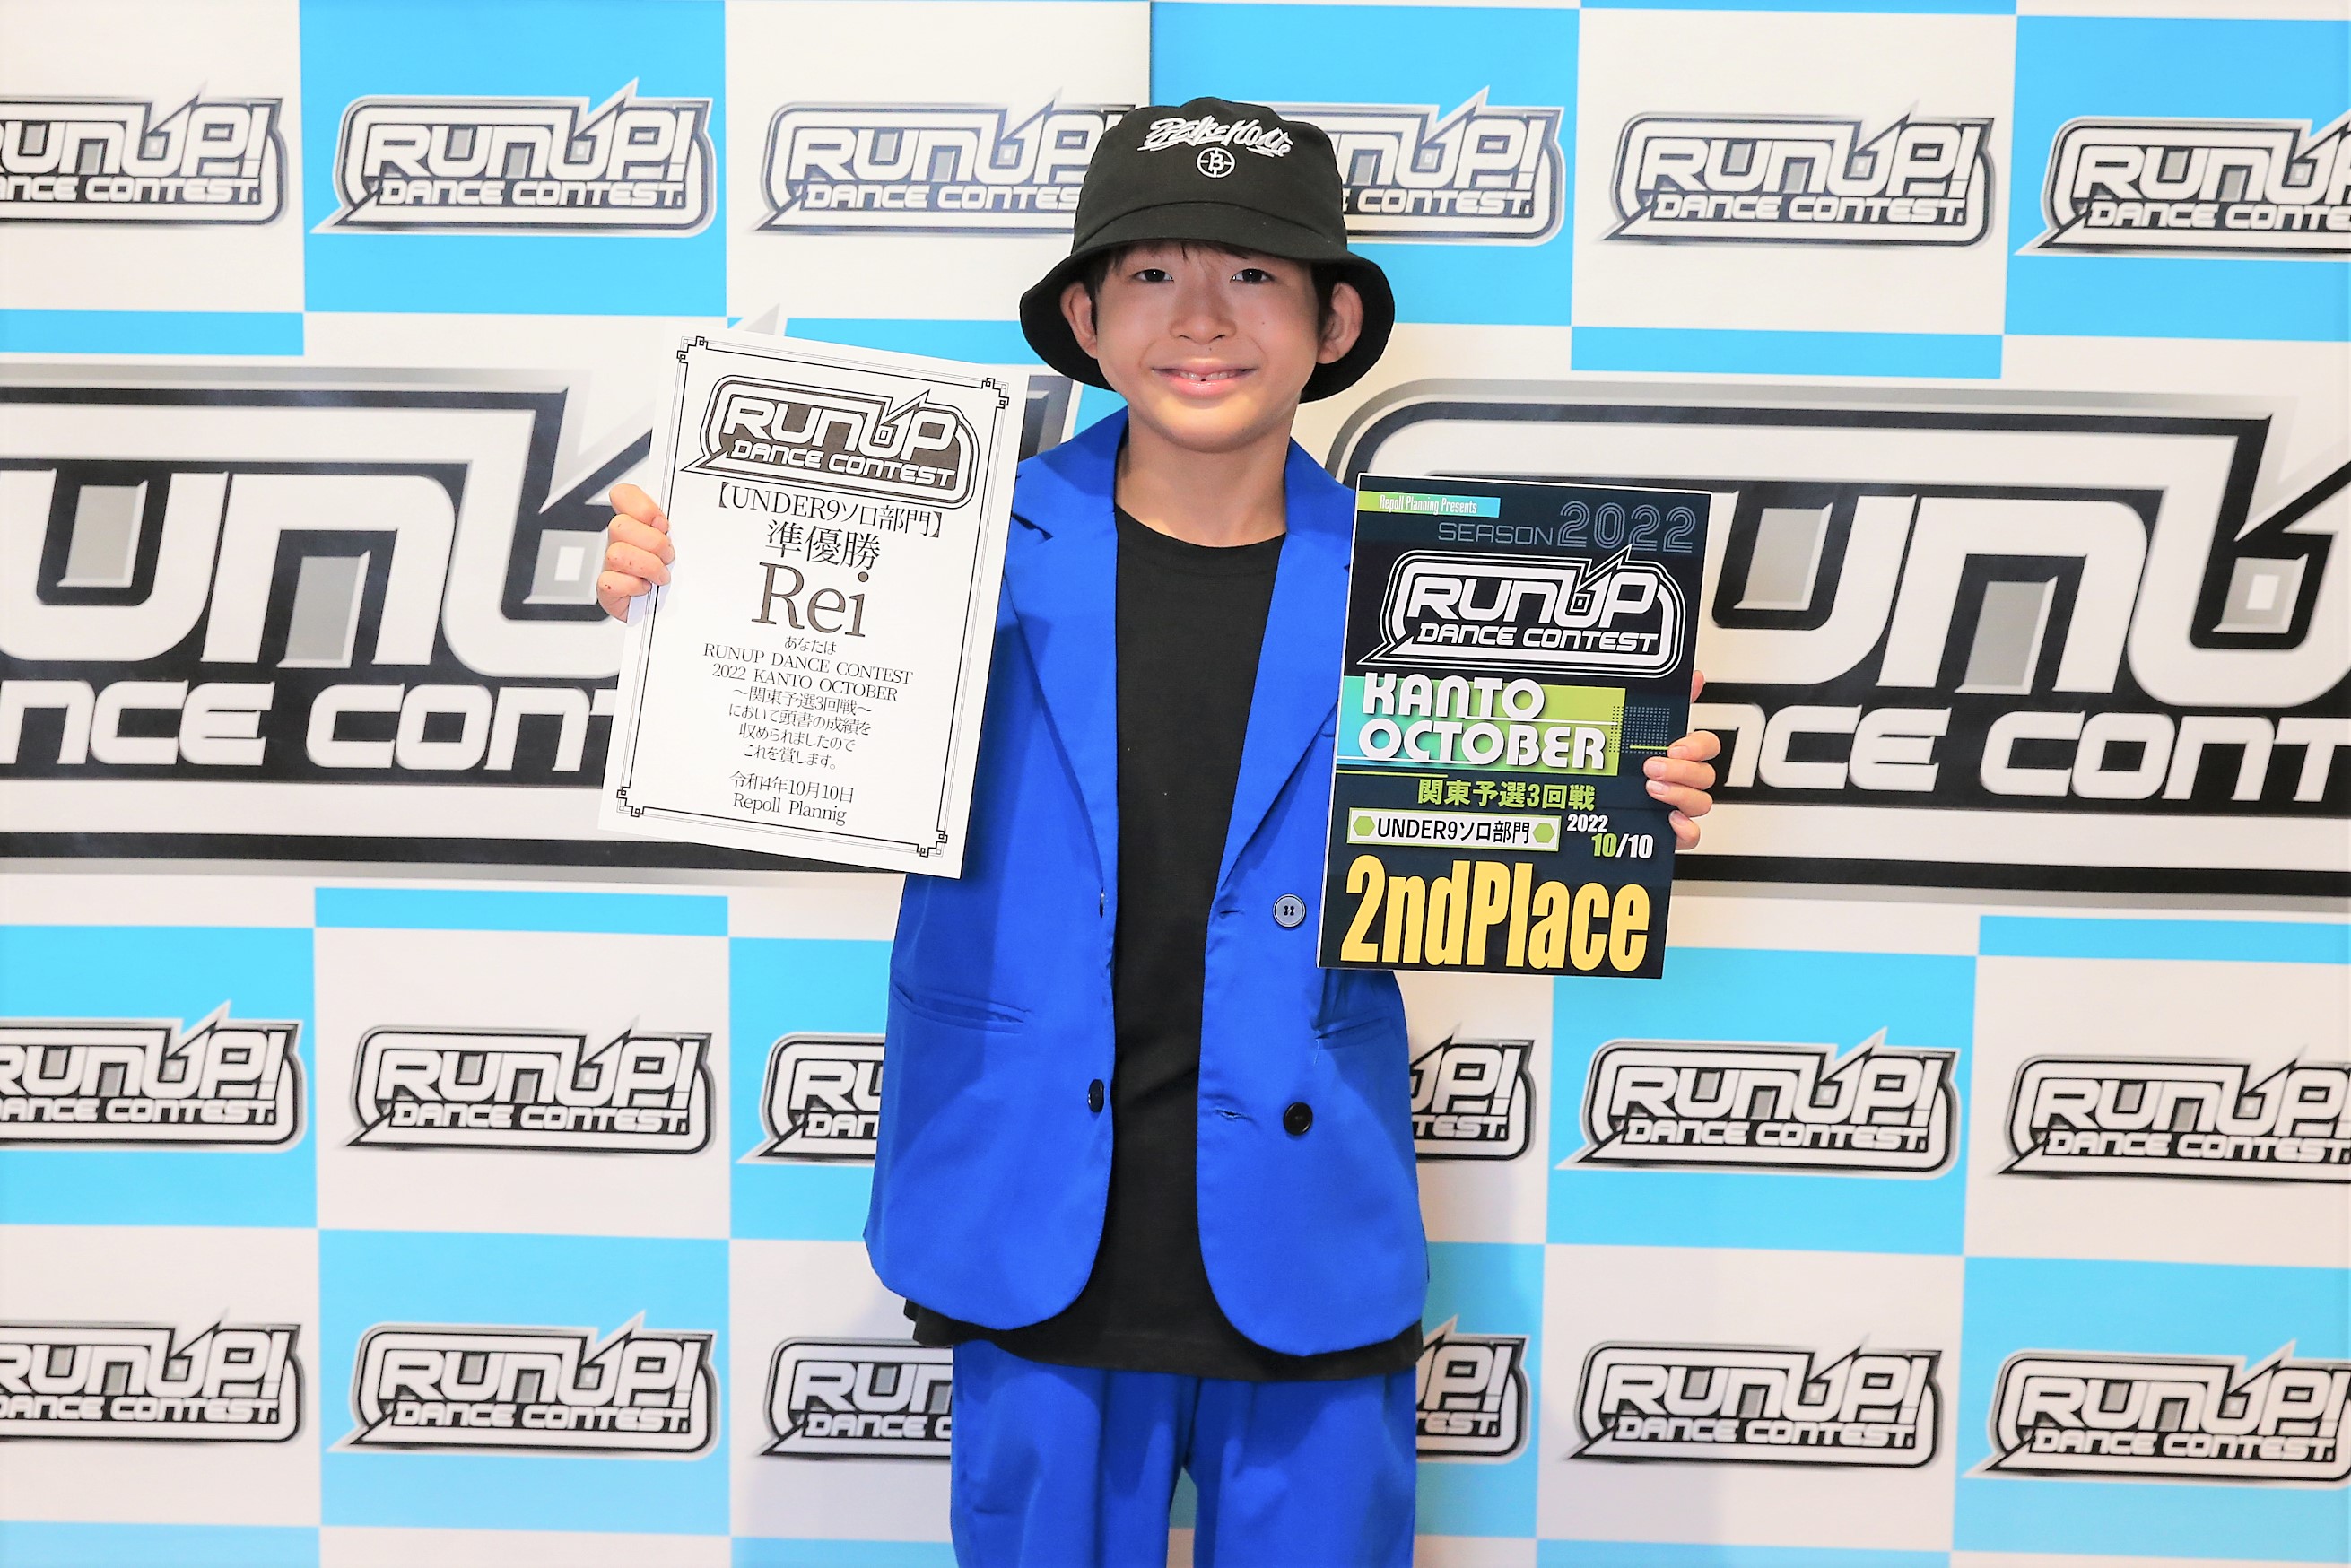 RUNUP 2022 KANTO OCTOBER UNDER9ソロ 準優勝 Rei